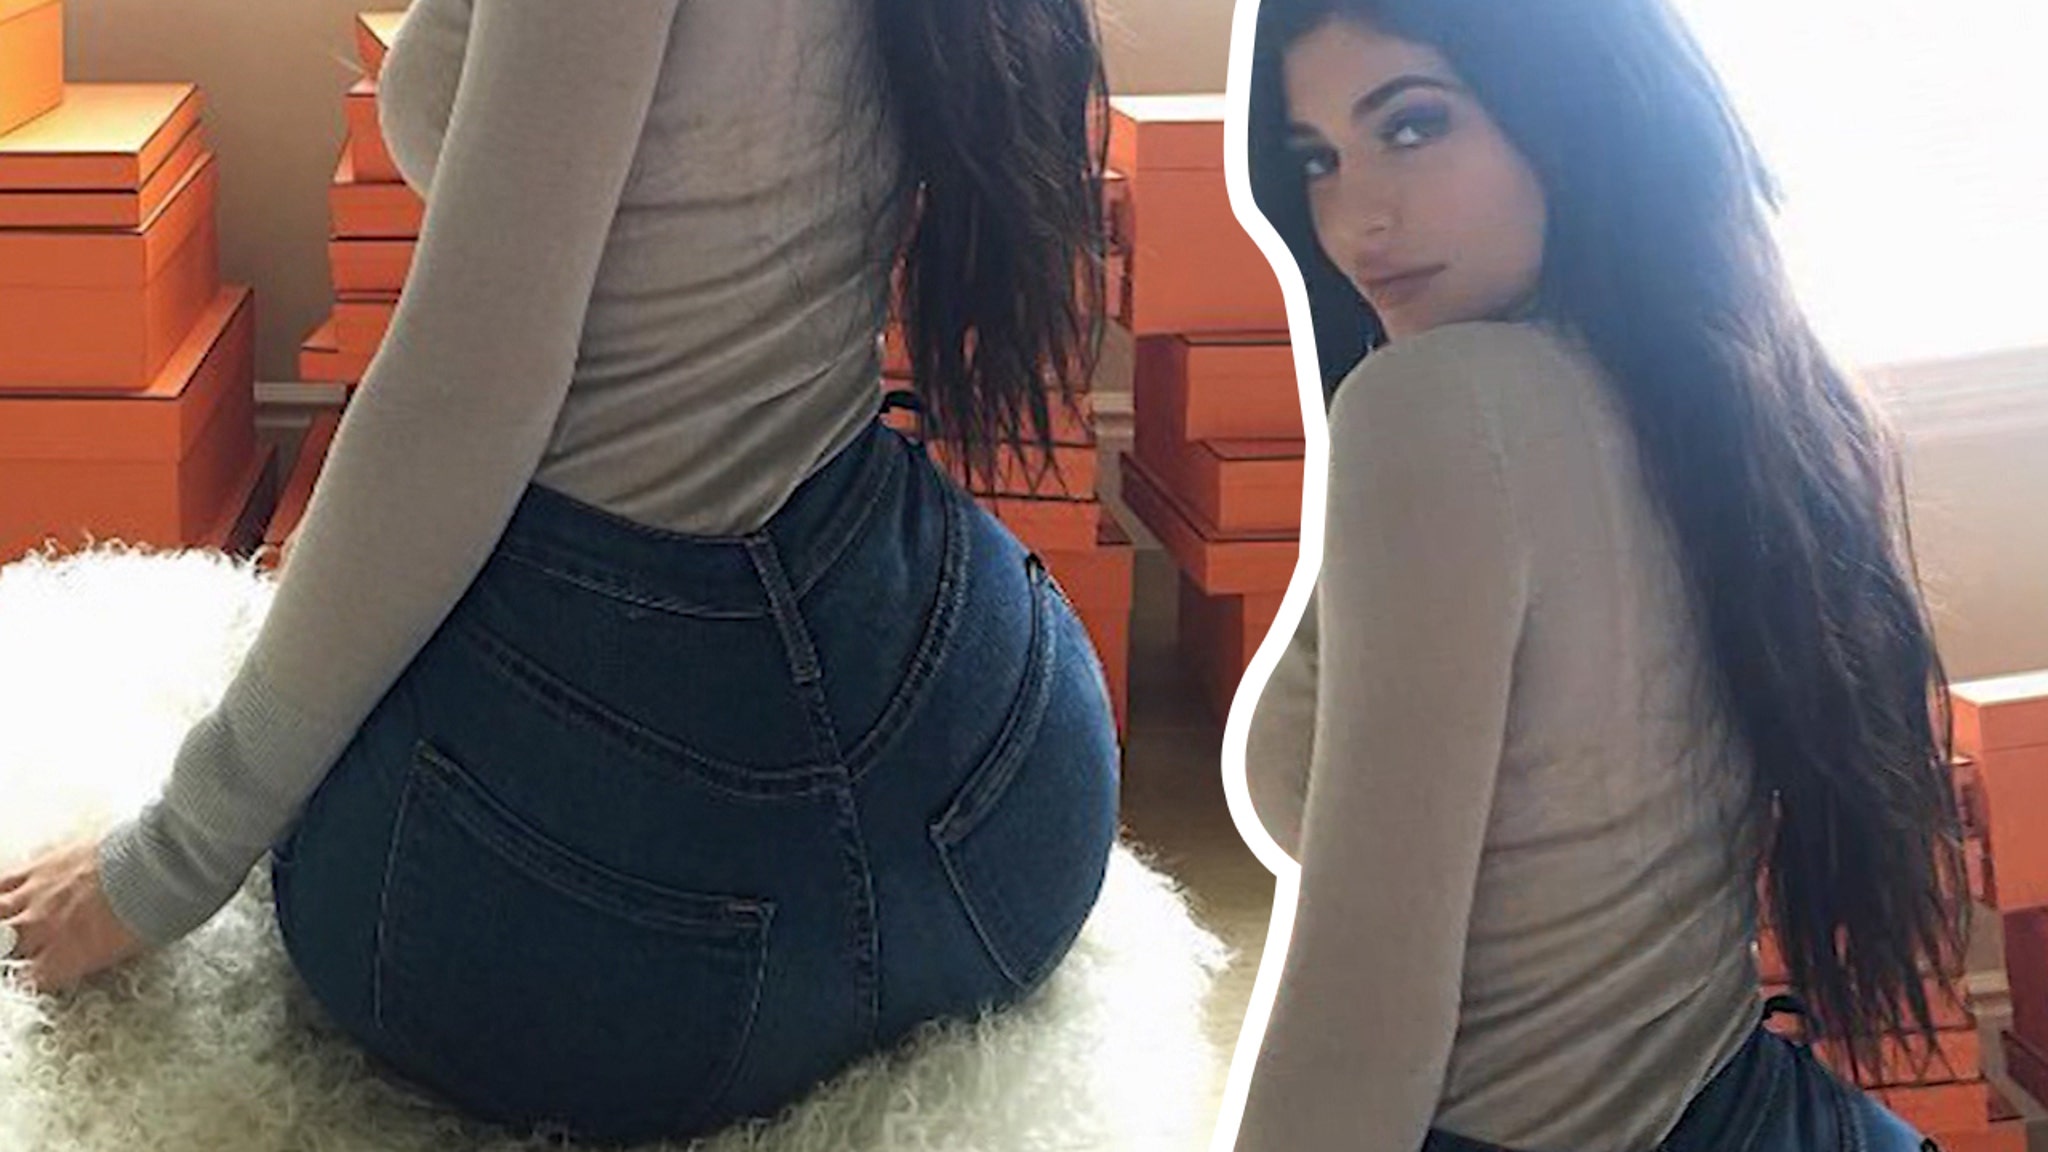 Kylie Jenners Giant Butt May Be An Optical Illusion